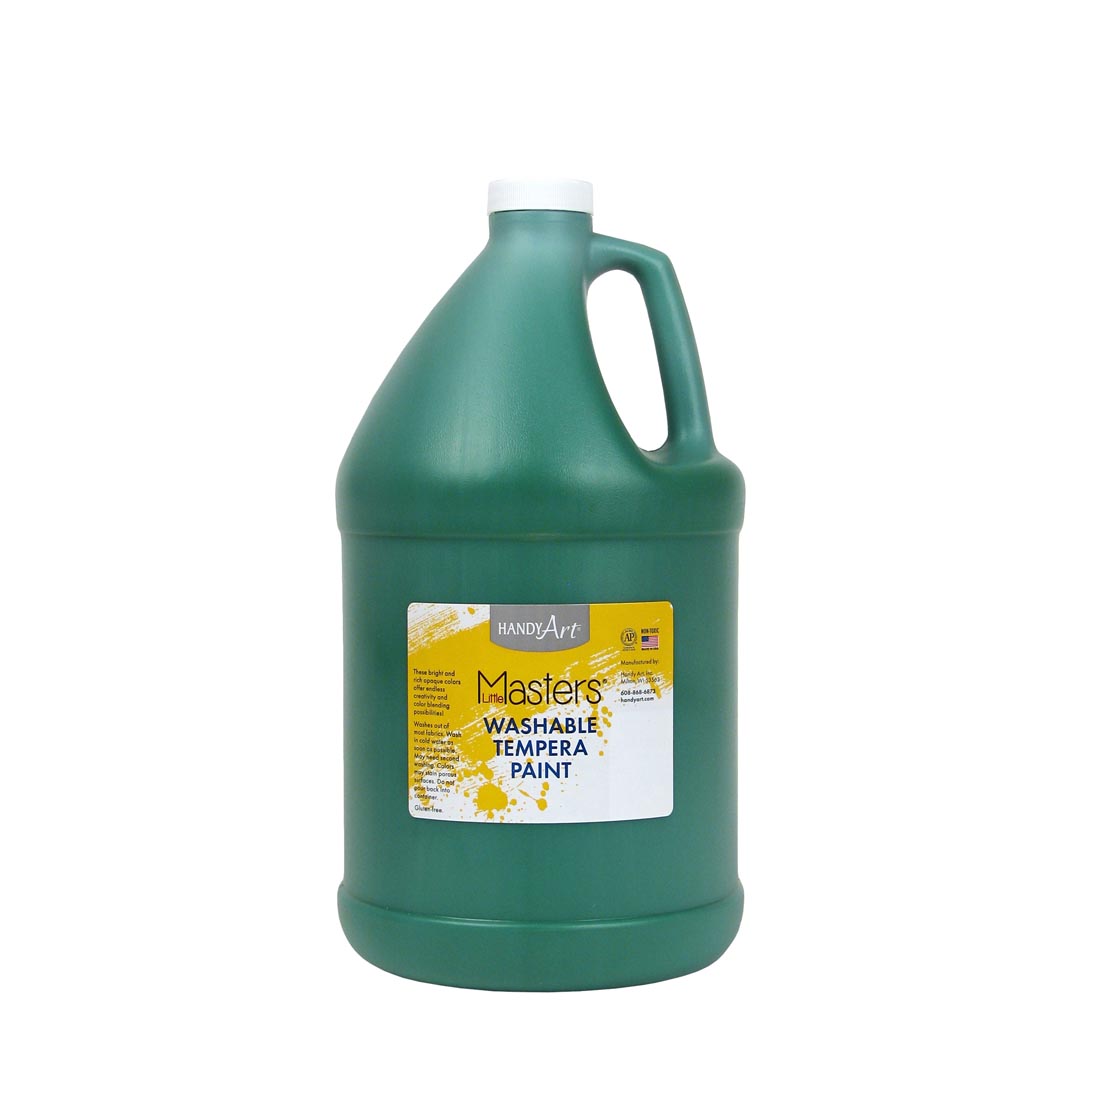 Gallon of Green Handy Art Little Masters Washable Tempera Paint